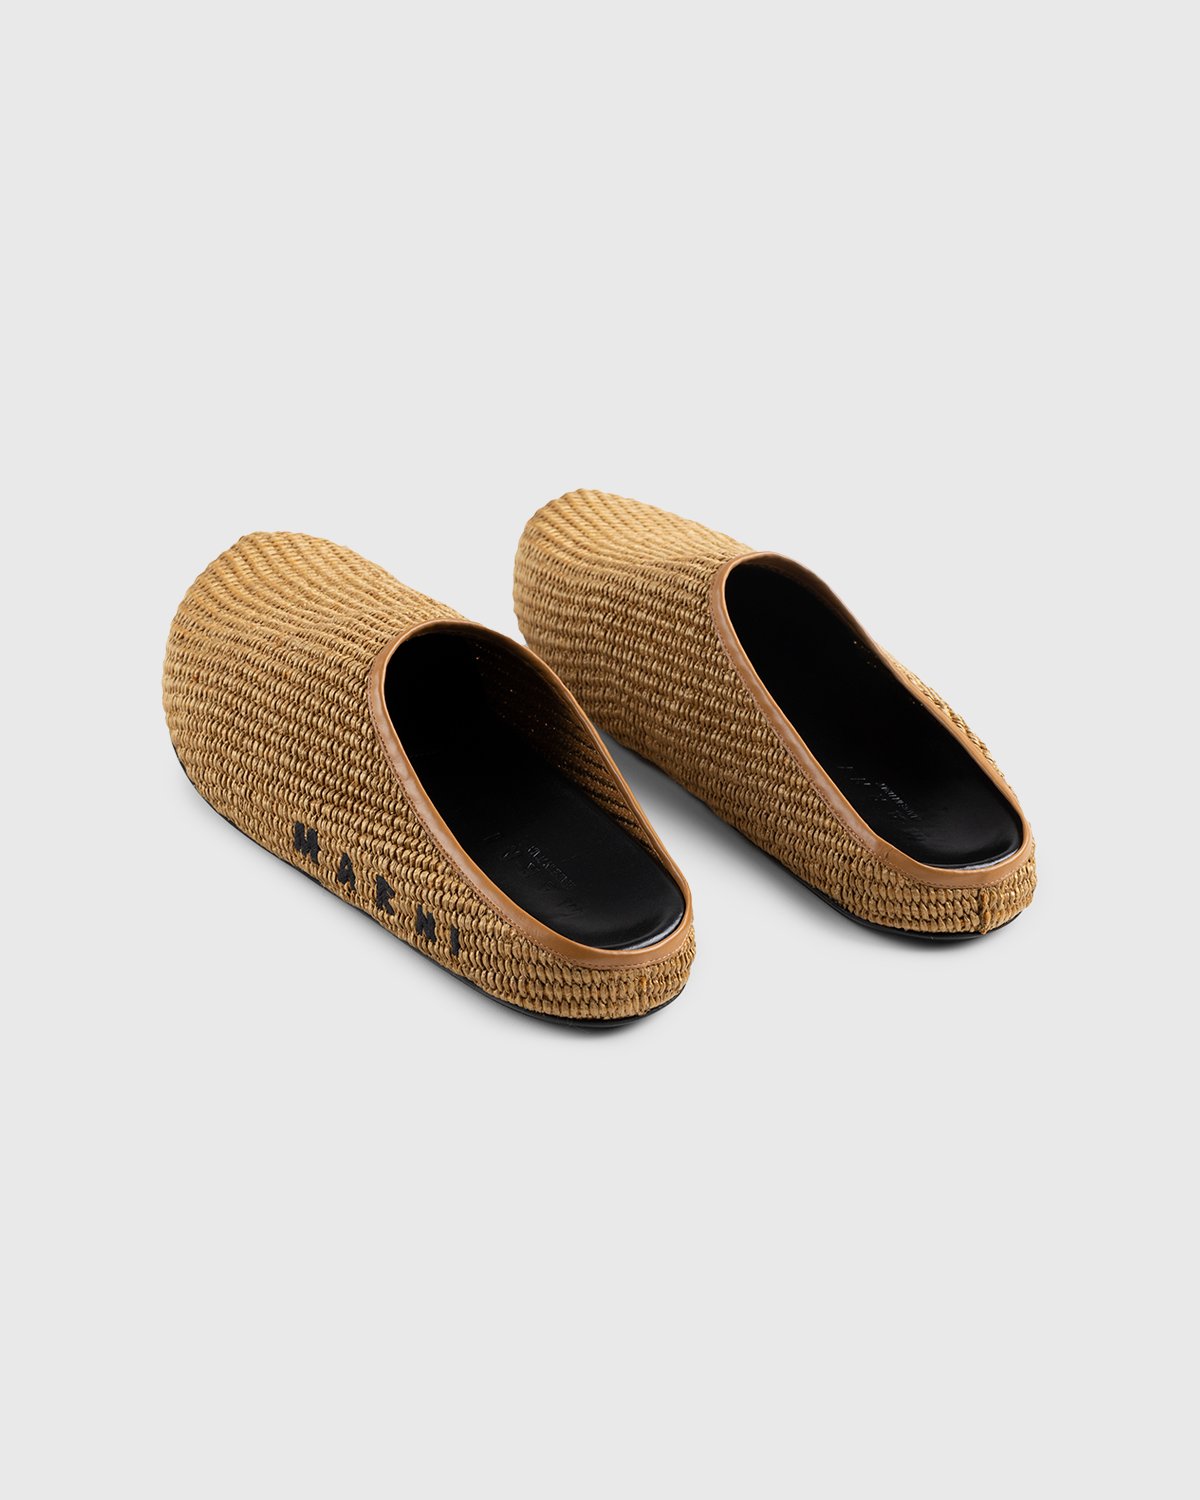 Marni - Woven Raffia and Leather Mules Brown/Black - Footwear - Brown - Image 4